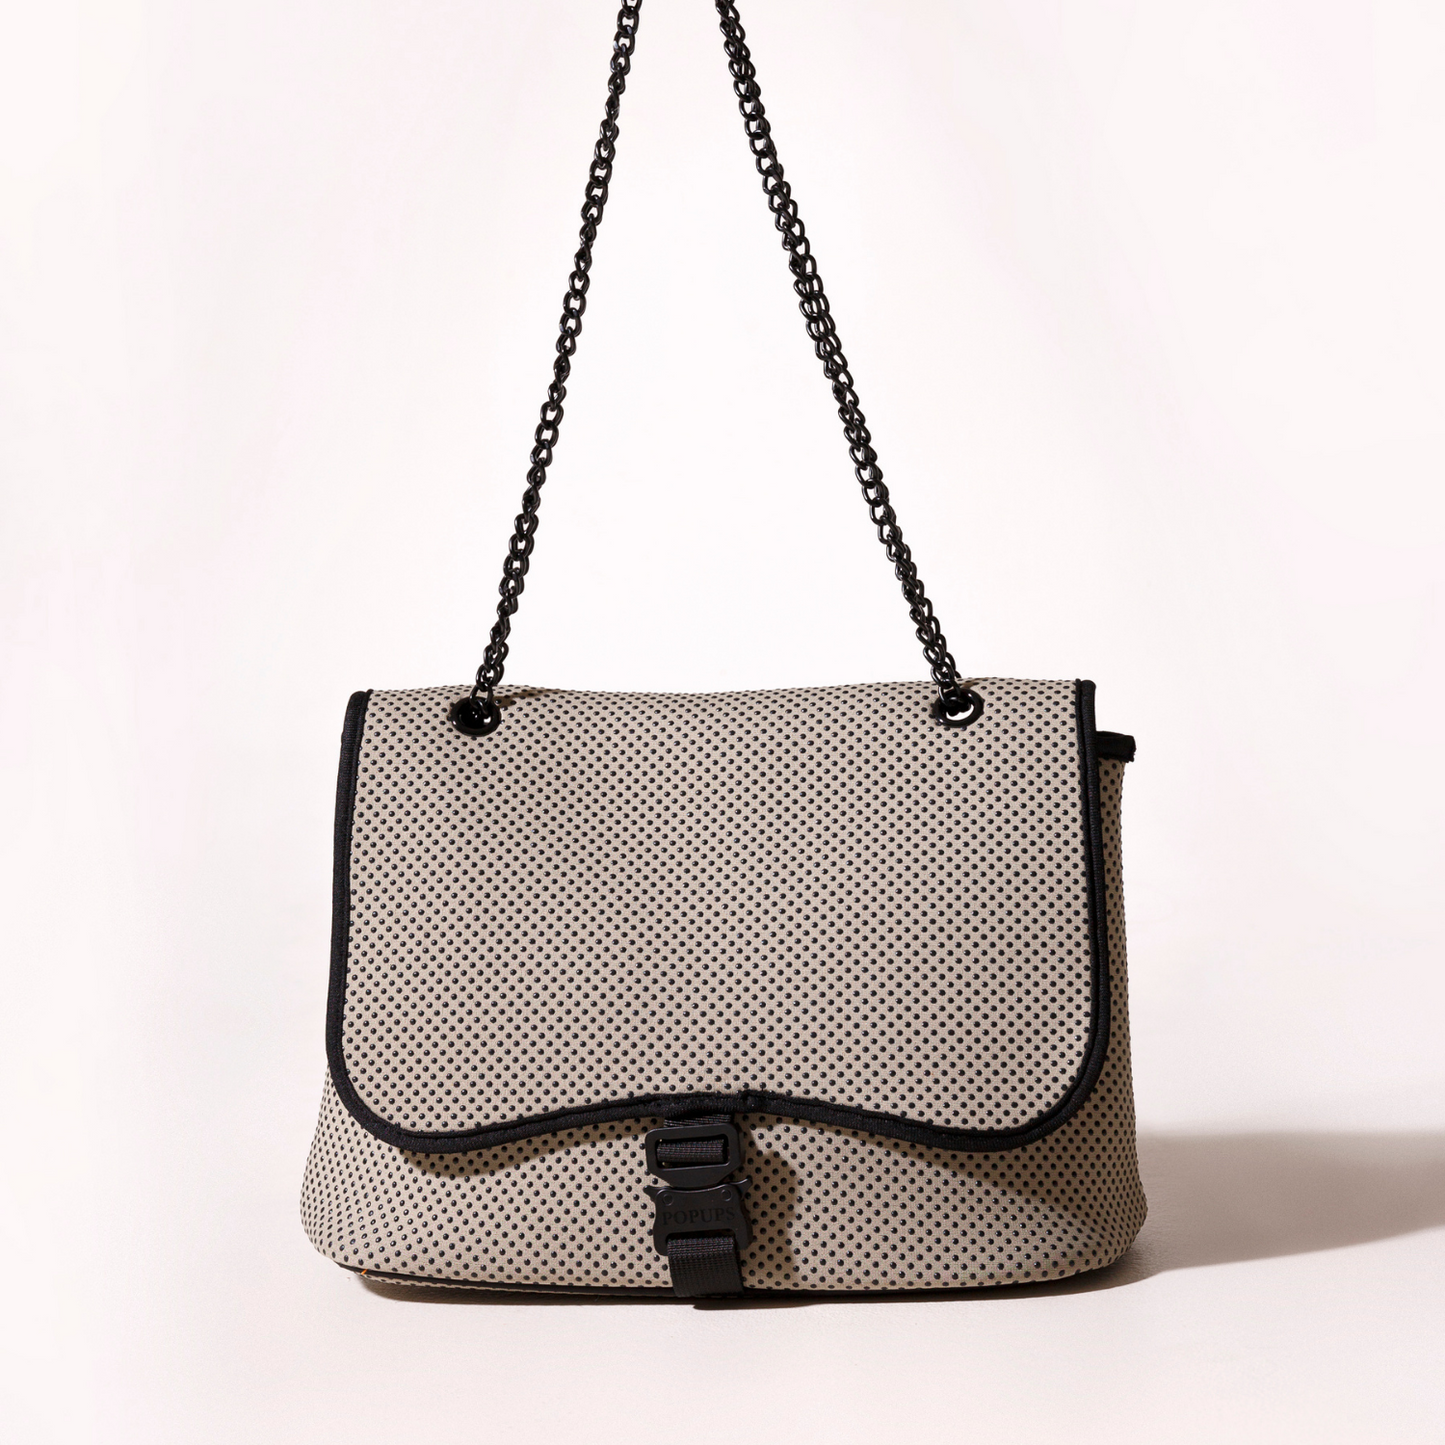 FLAP CROSSBODY + EVERYDAY TOTE - TAUPE